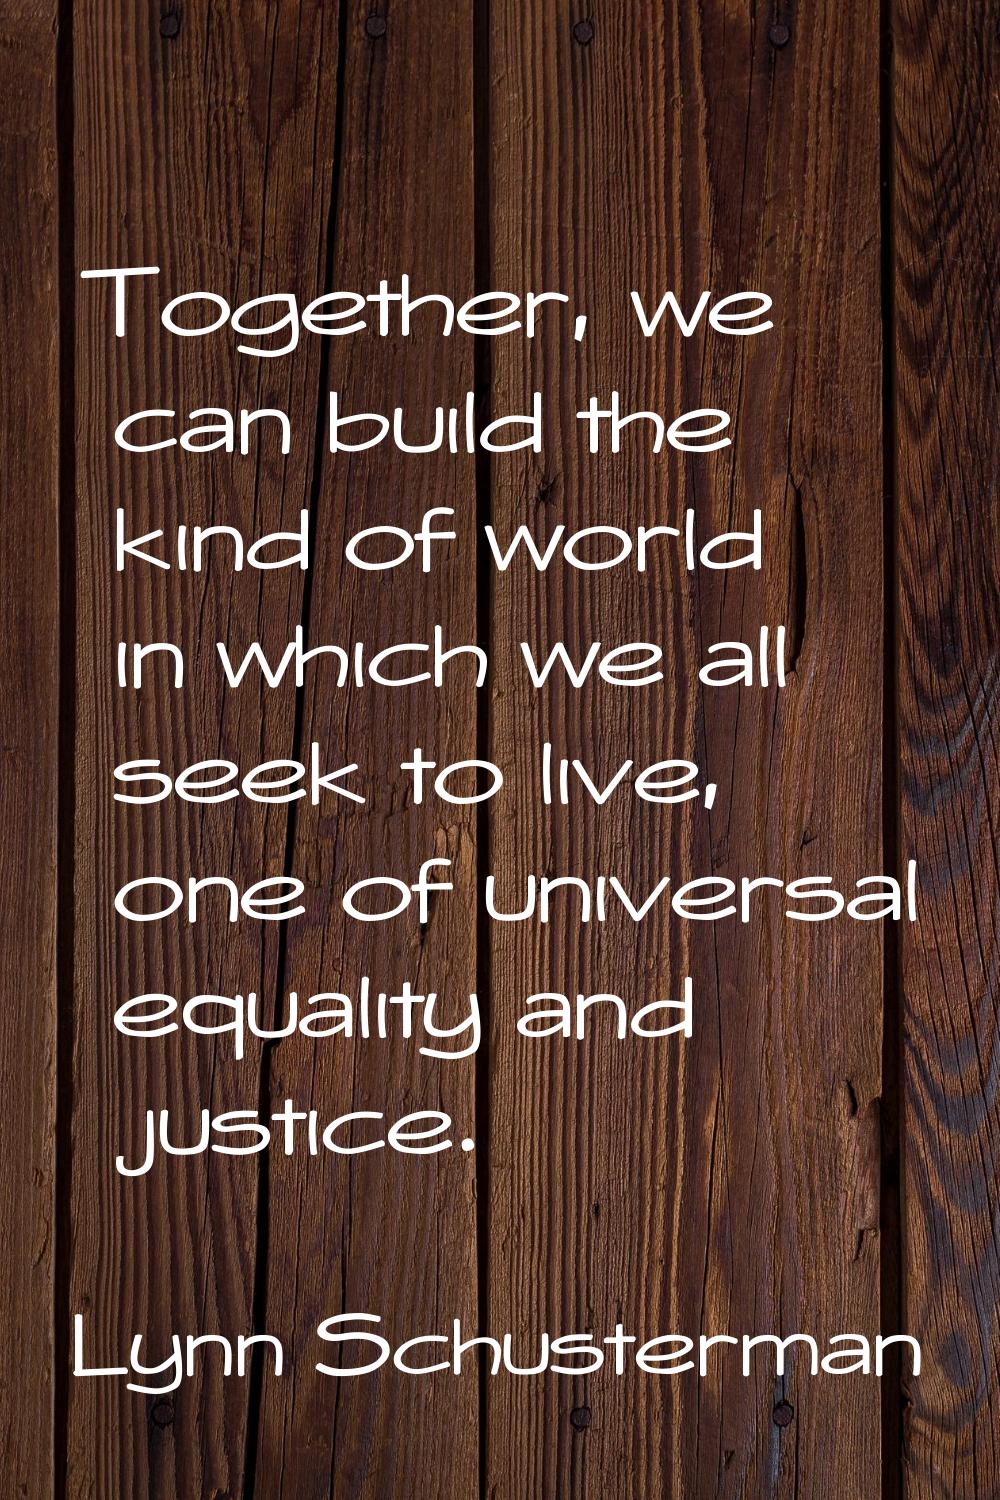 Together, we can build the kind of world in which we all seek to live, one of universal equality an